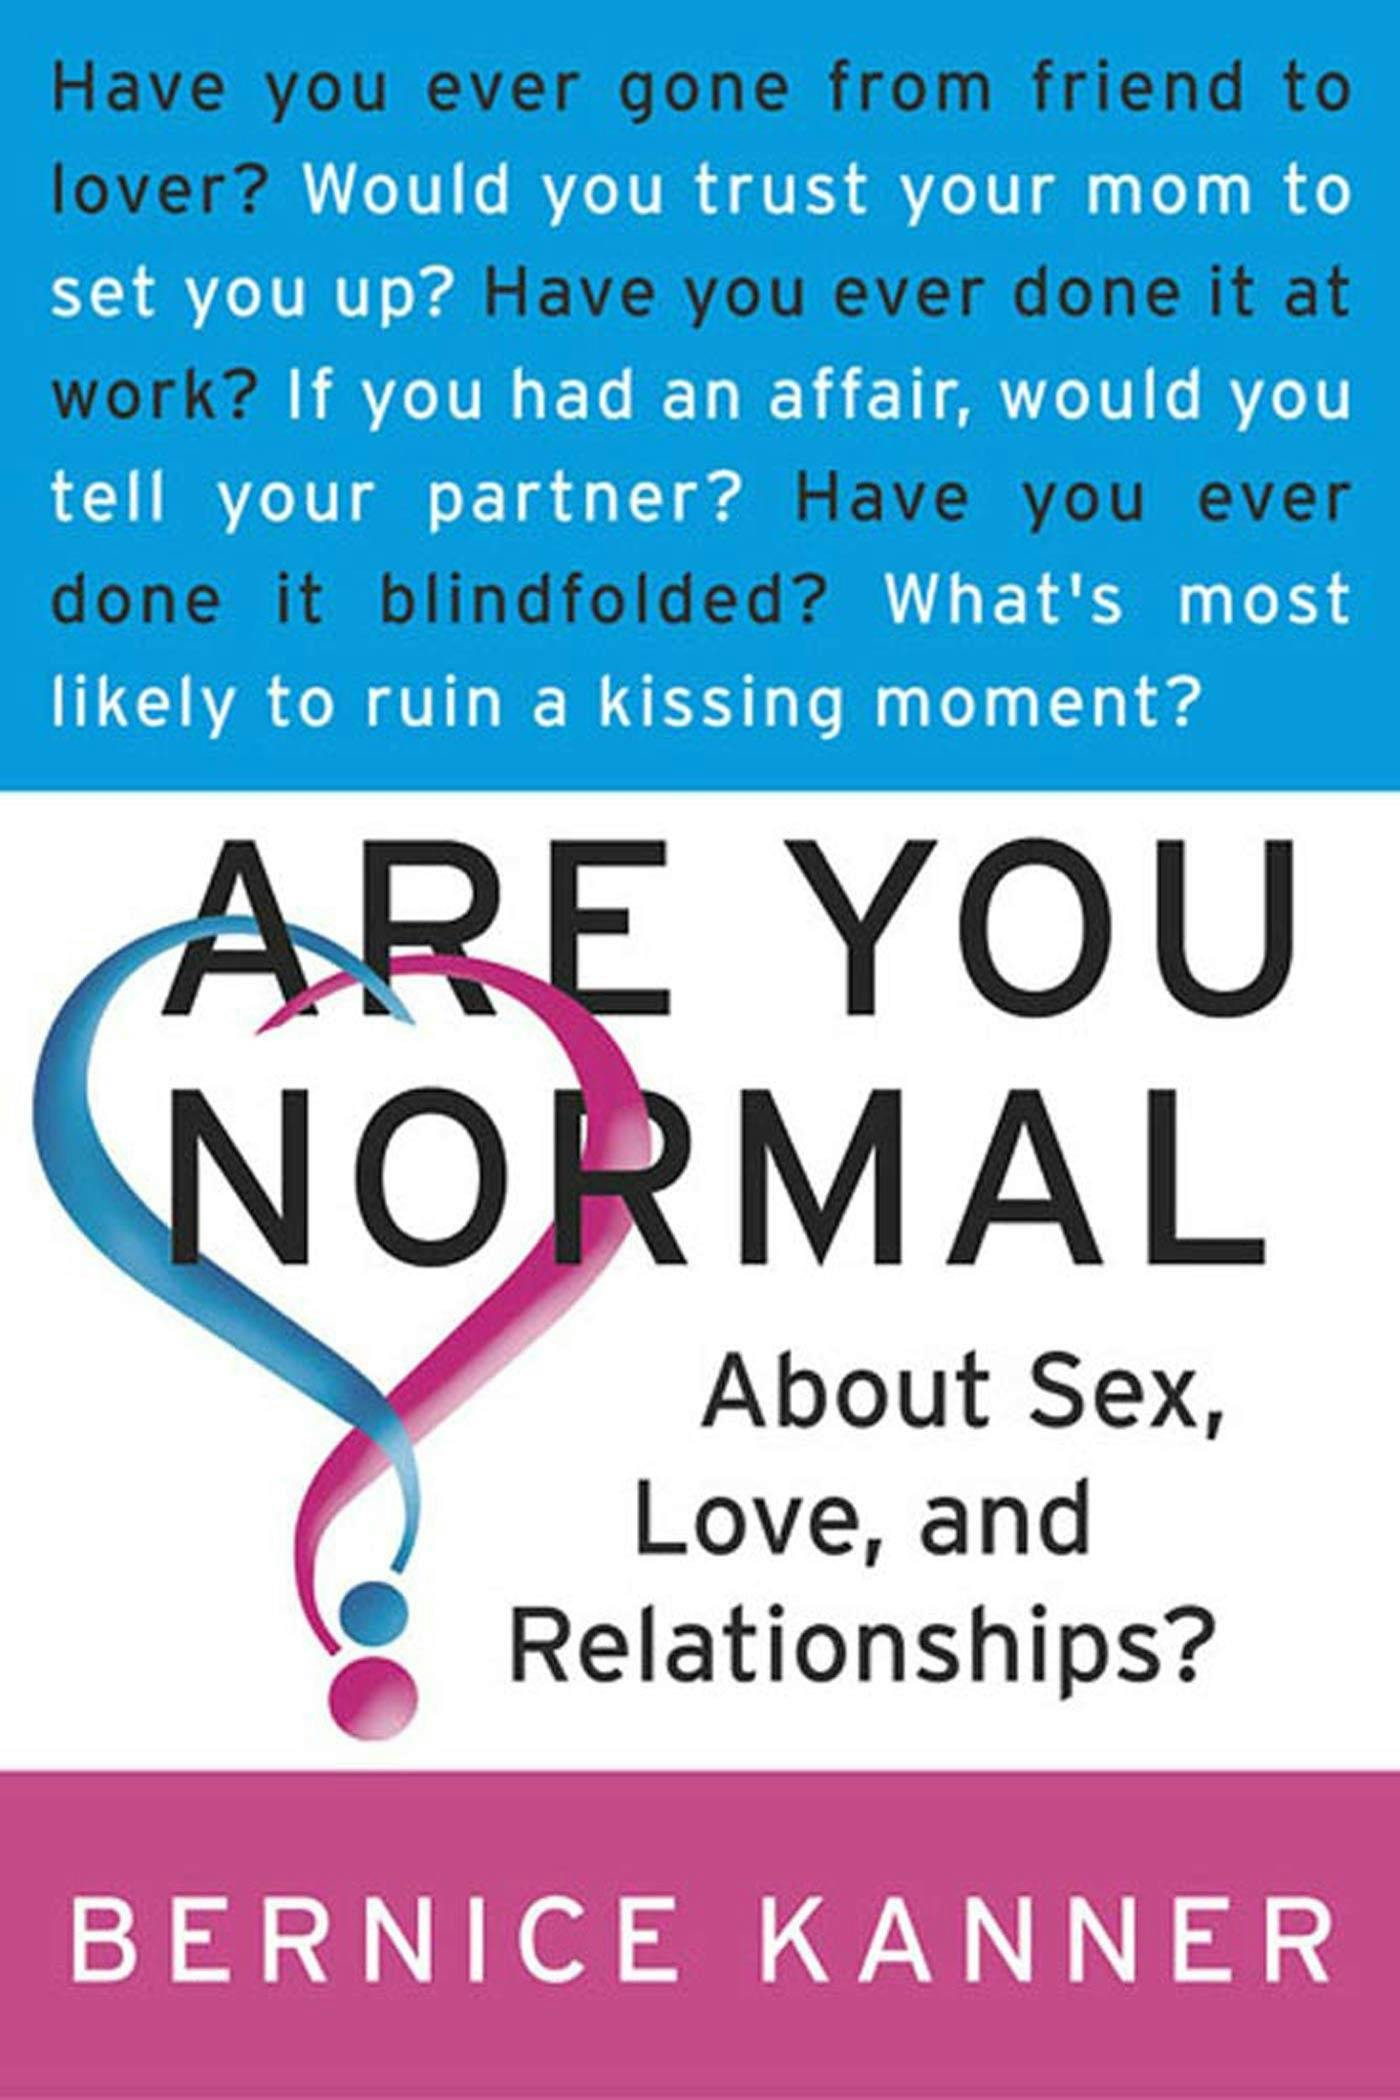 Are You Normal About Sex, Love, and Relationships? photo